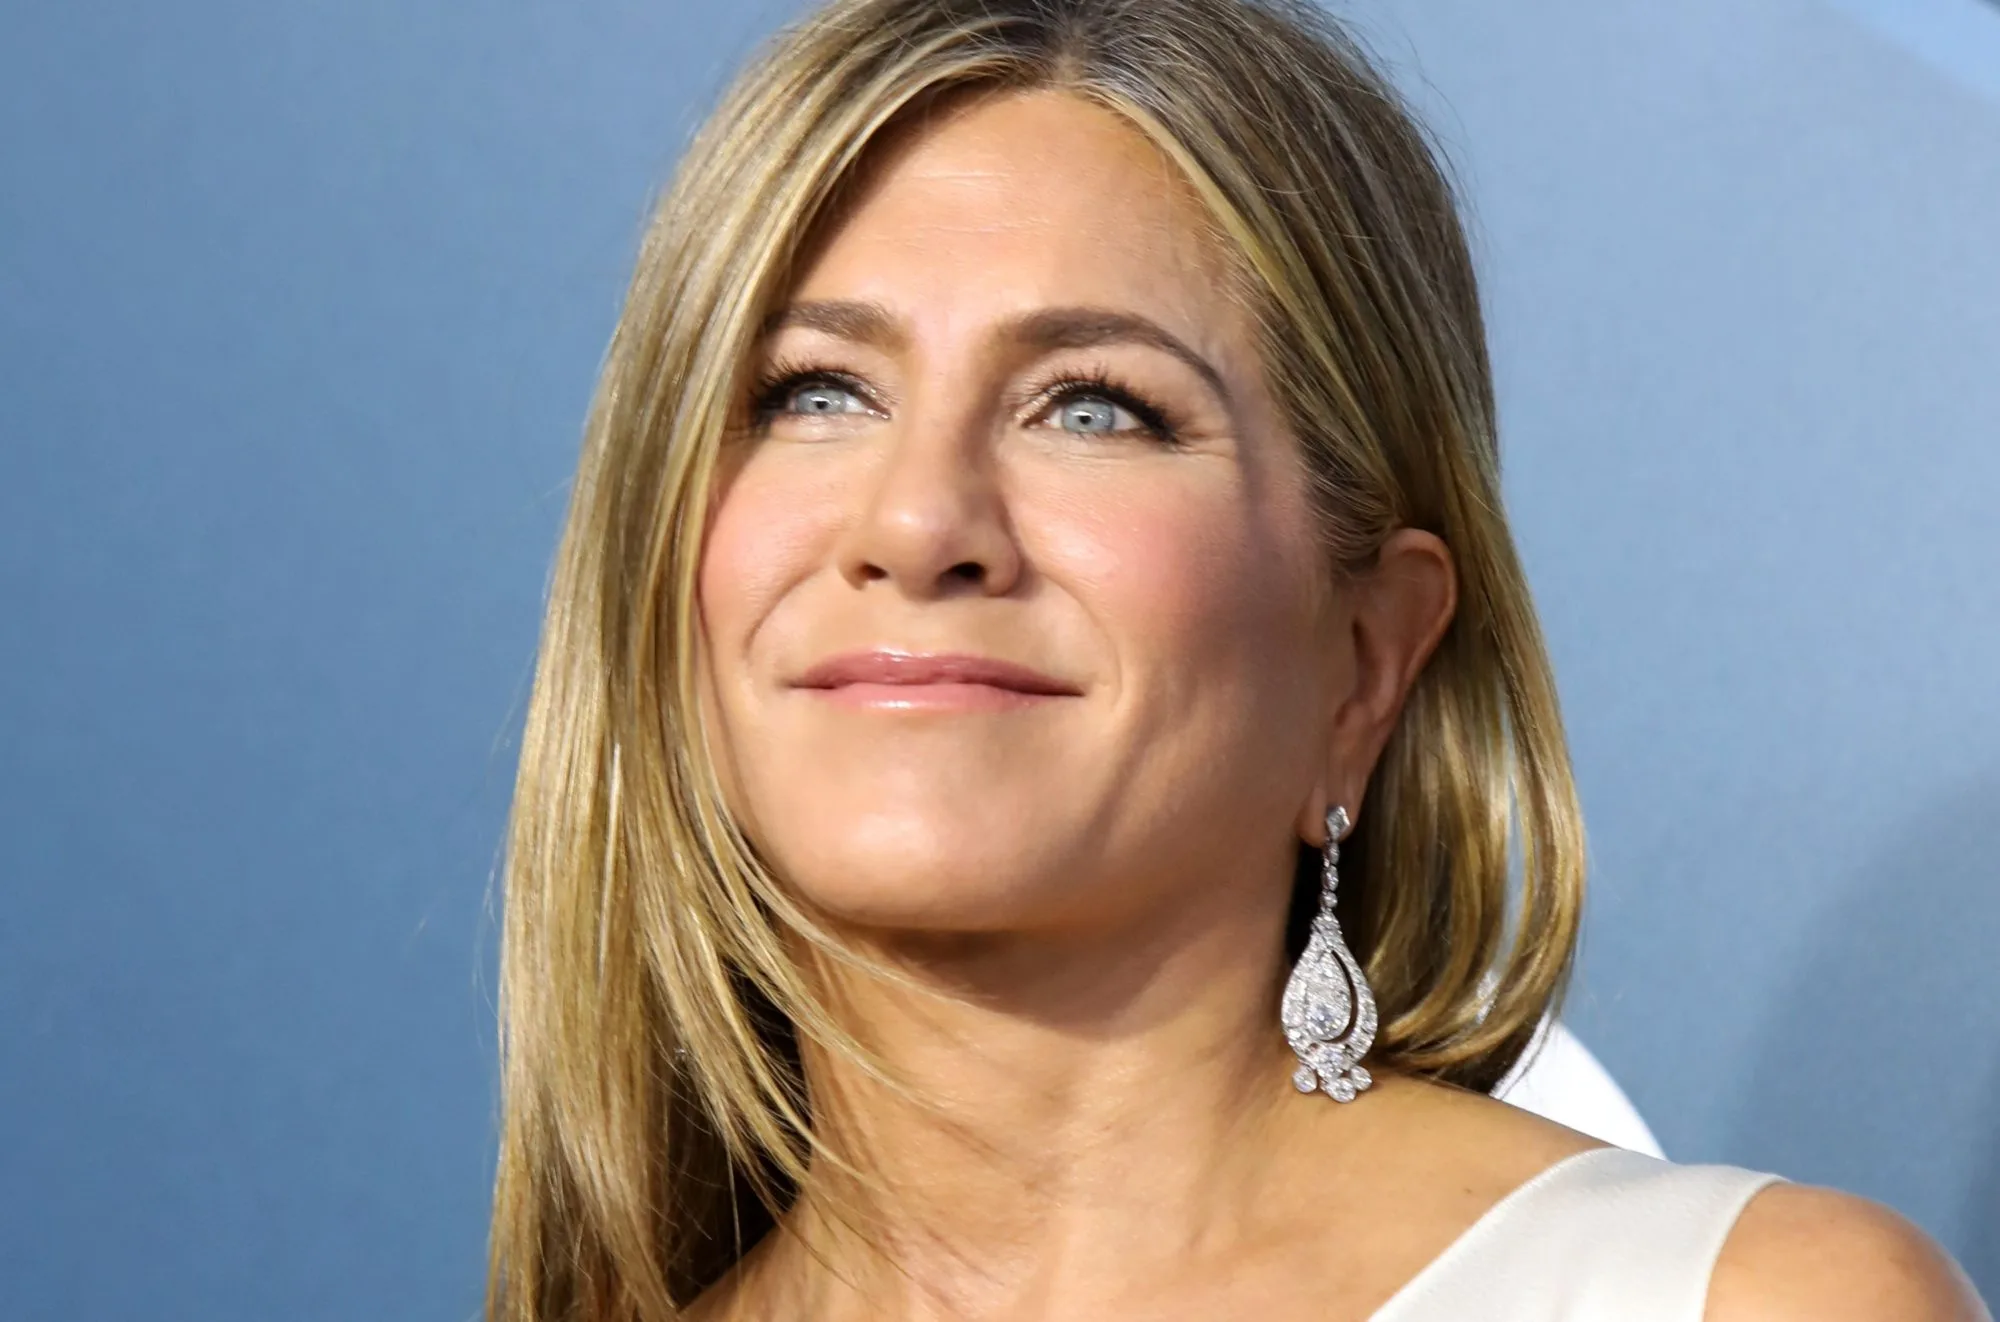 How To Preserve A Youthful Body With Jennifer Aniston’s Tips